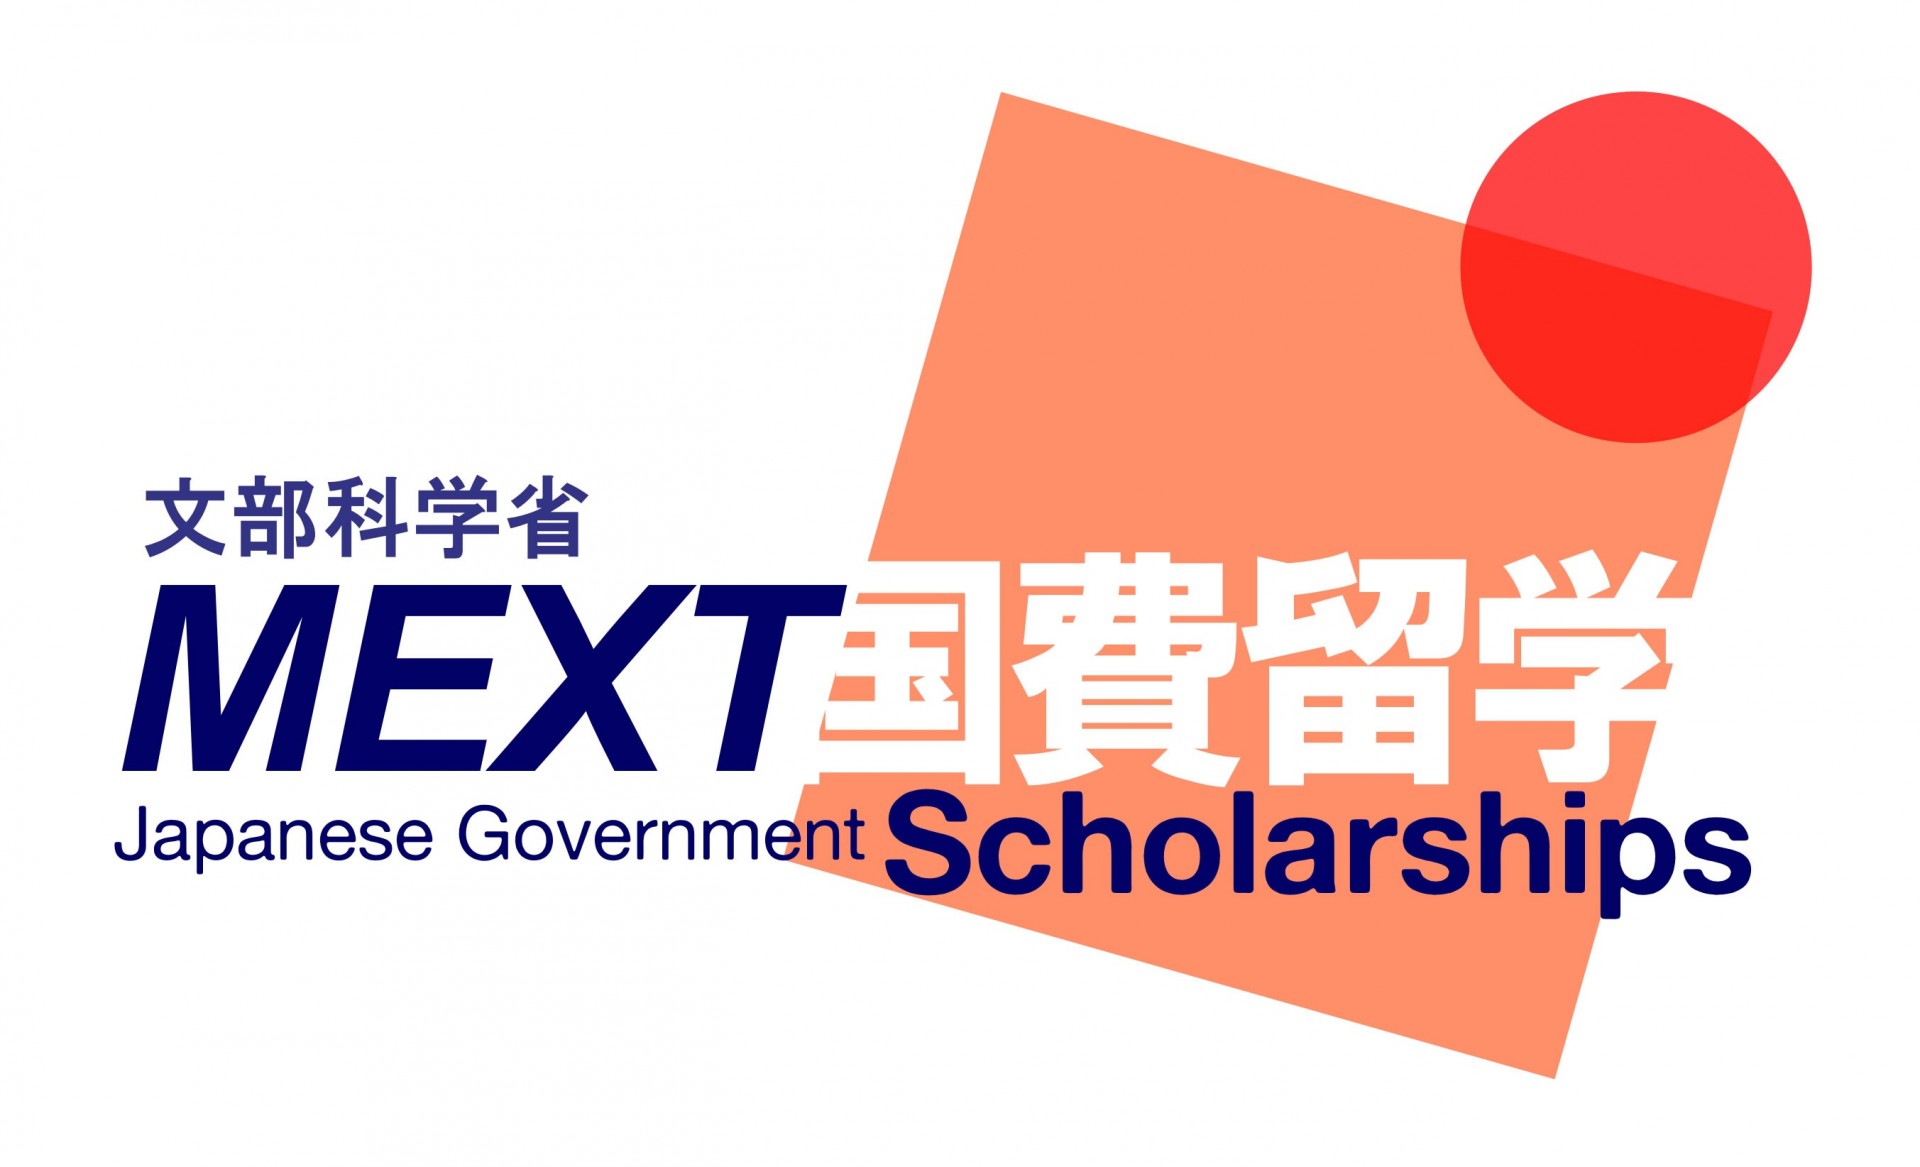 Guide to Apply for MEXT - Japanese Government Scholarships For International Students